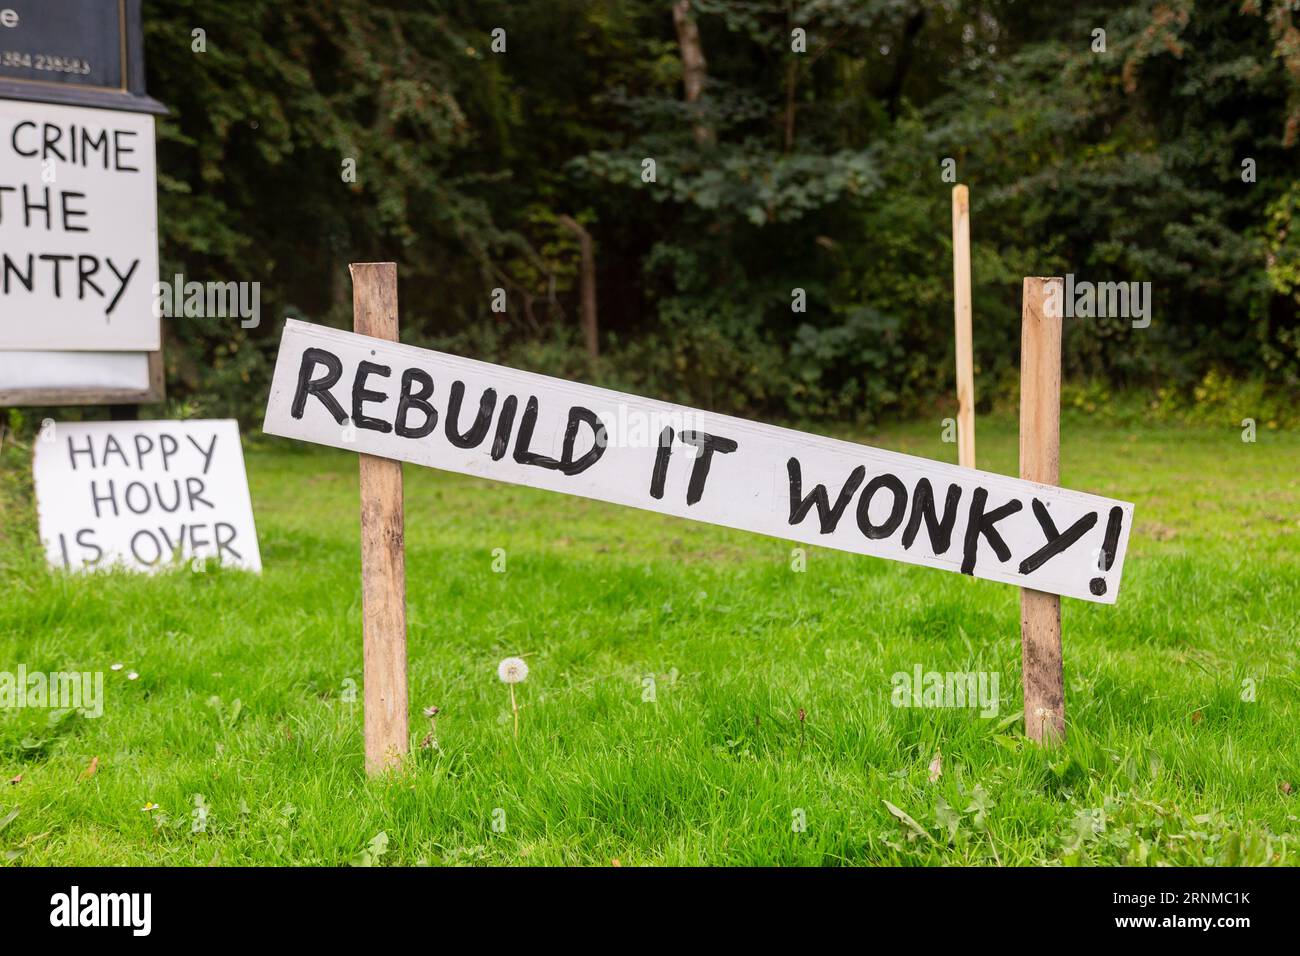 Himley, Staffordshire, UK. 2nd Sep, 2023. Four weeks after the famous Crooked House pub burned down, protest signs and the Black Country's flag are displayed in support of re-building the landmark building in the same location. A sign reads Rebuild it Wonky! Credit: Peter Lopeman/Alamy Live News Stock Photo